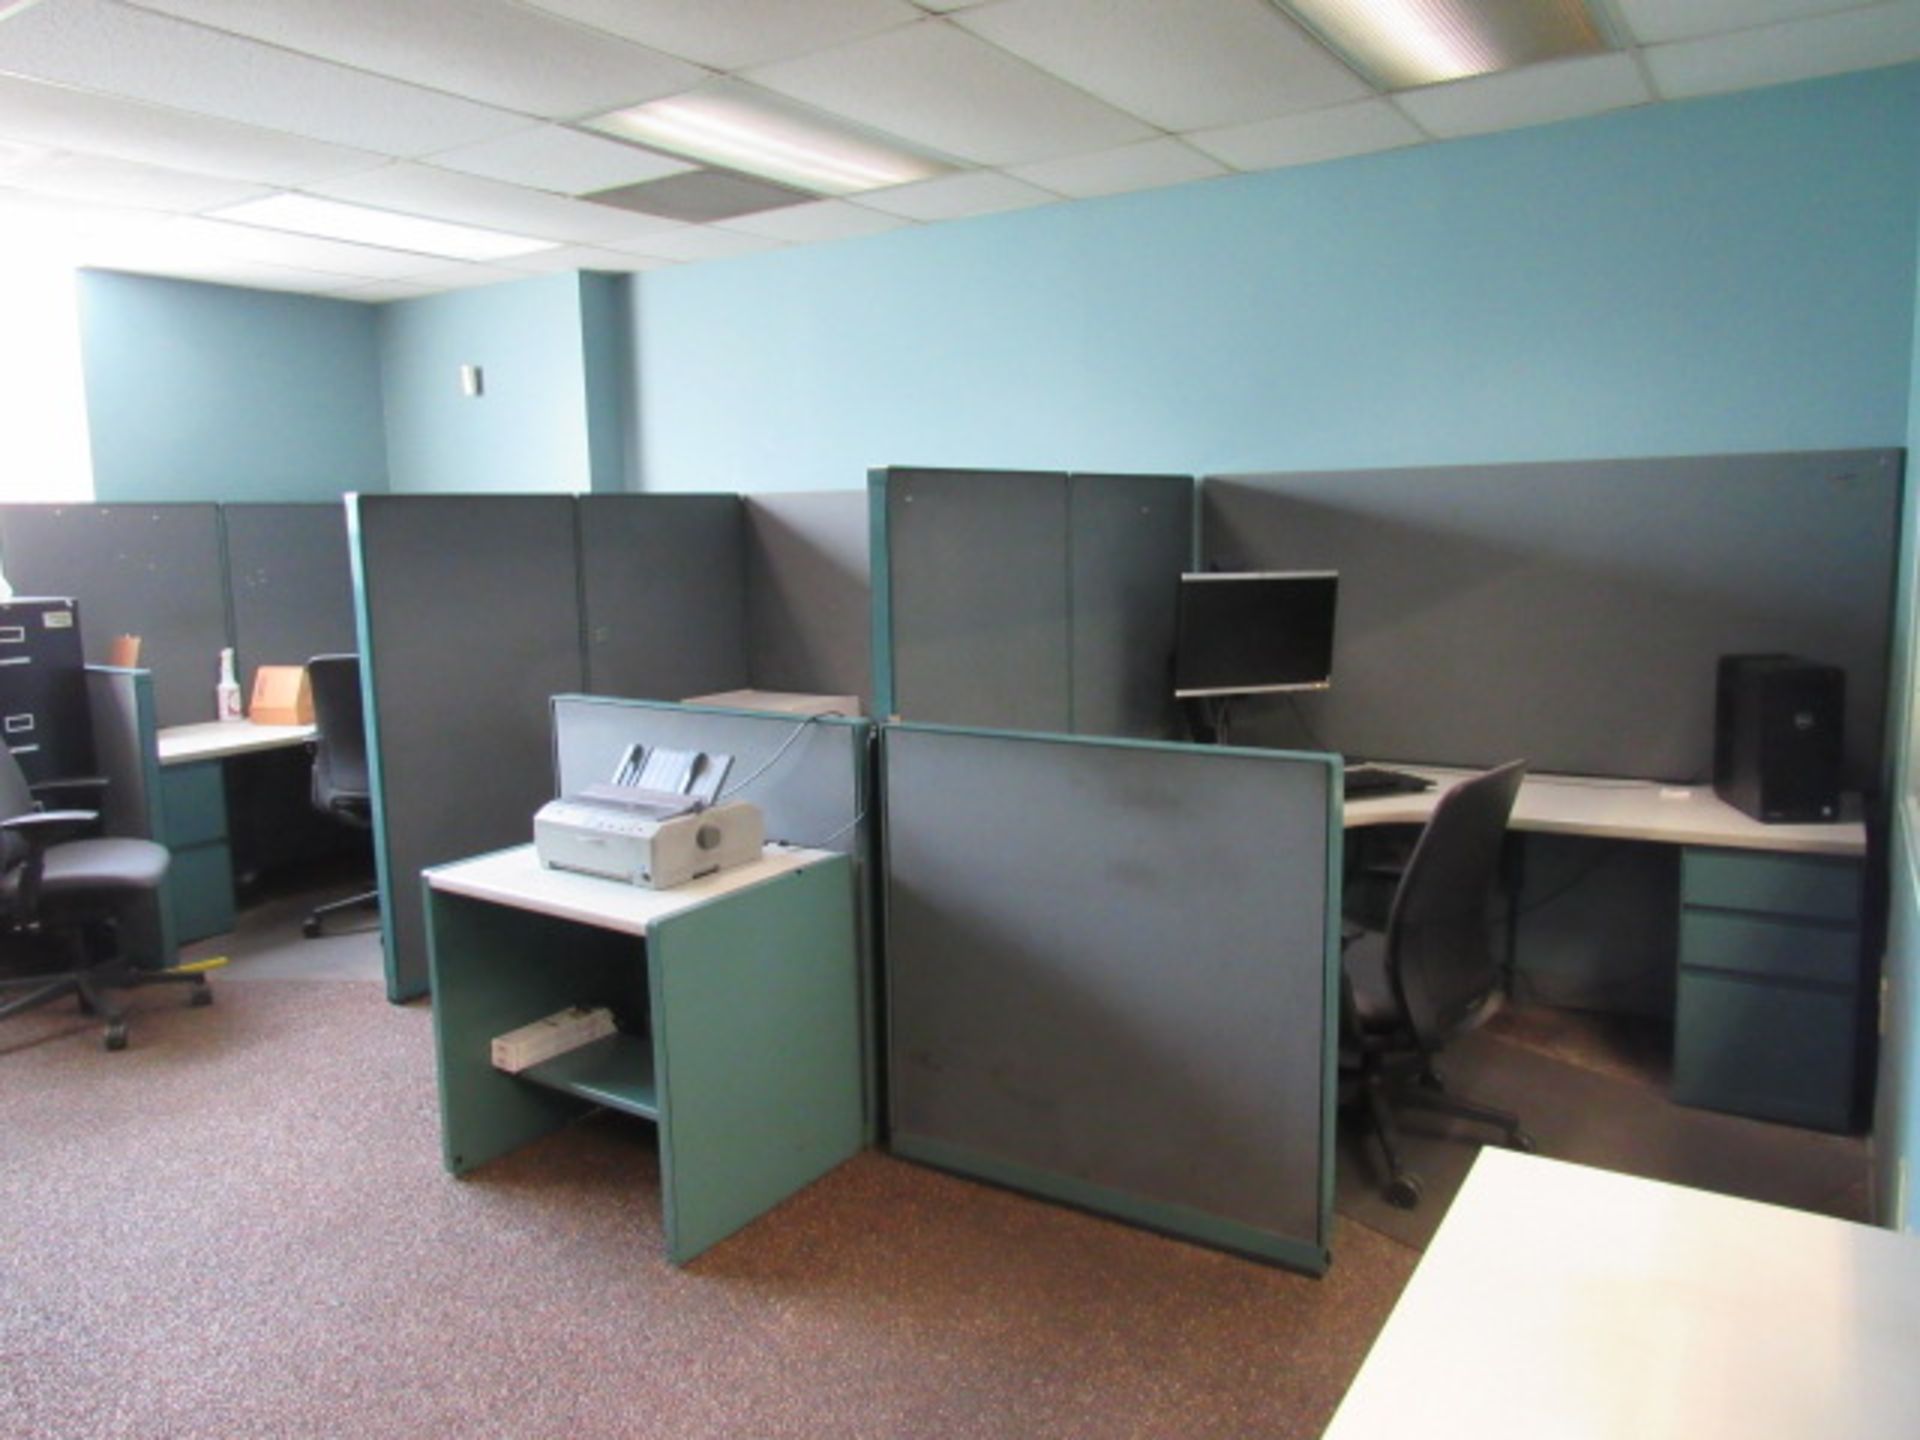 (8) Cubicles - Image 2 of 3